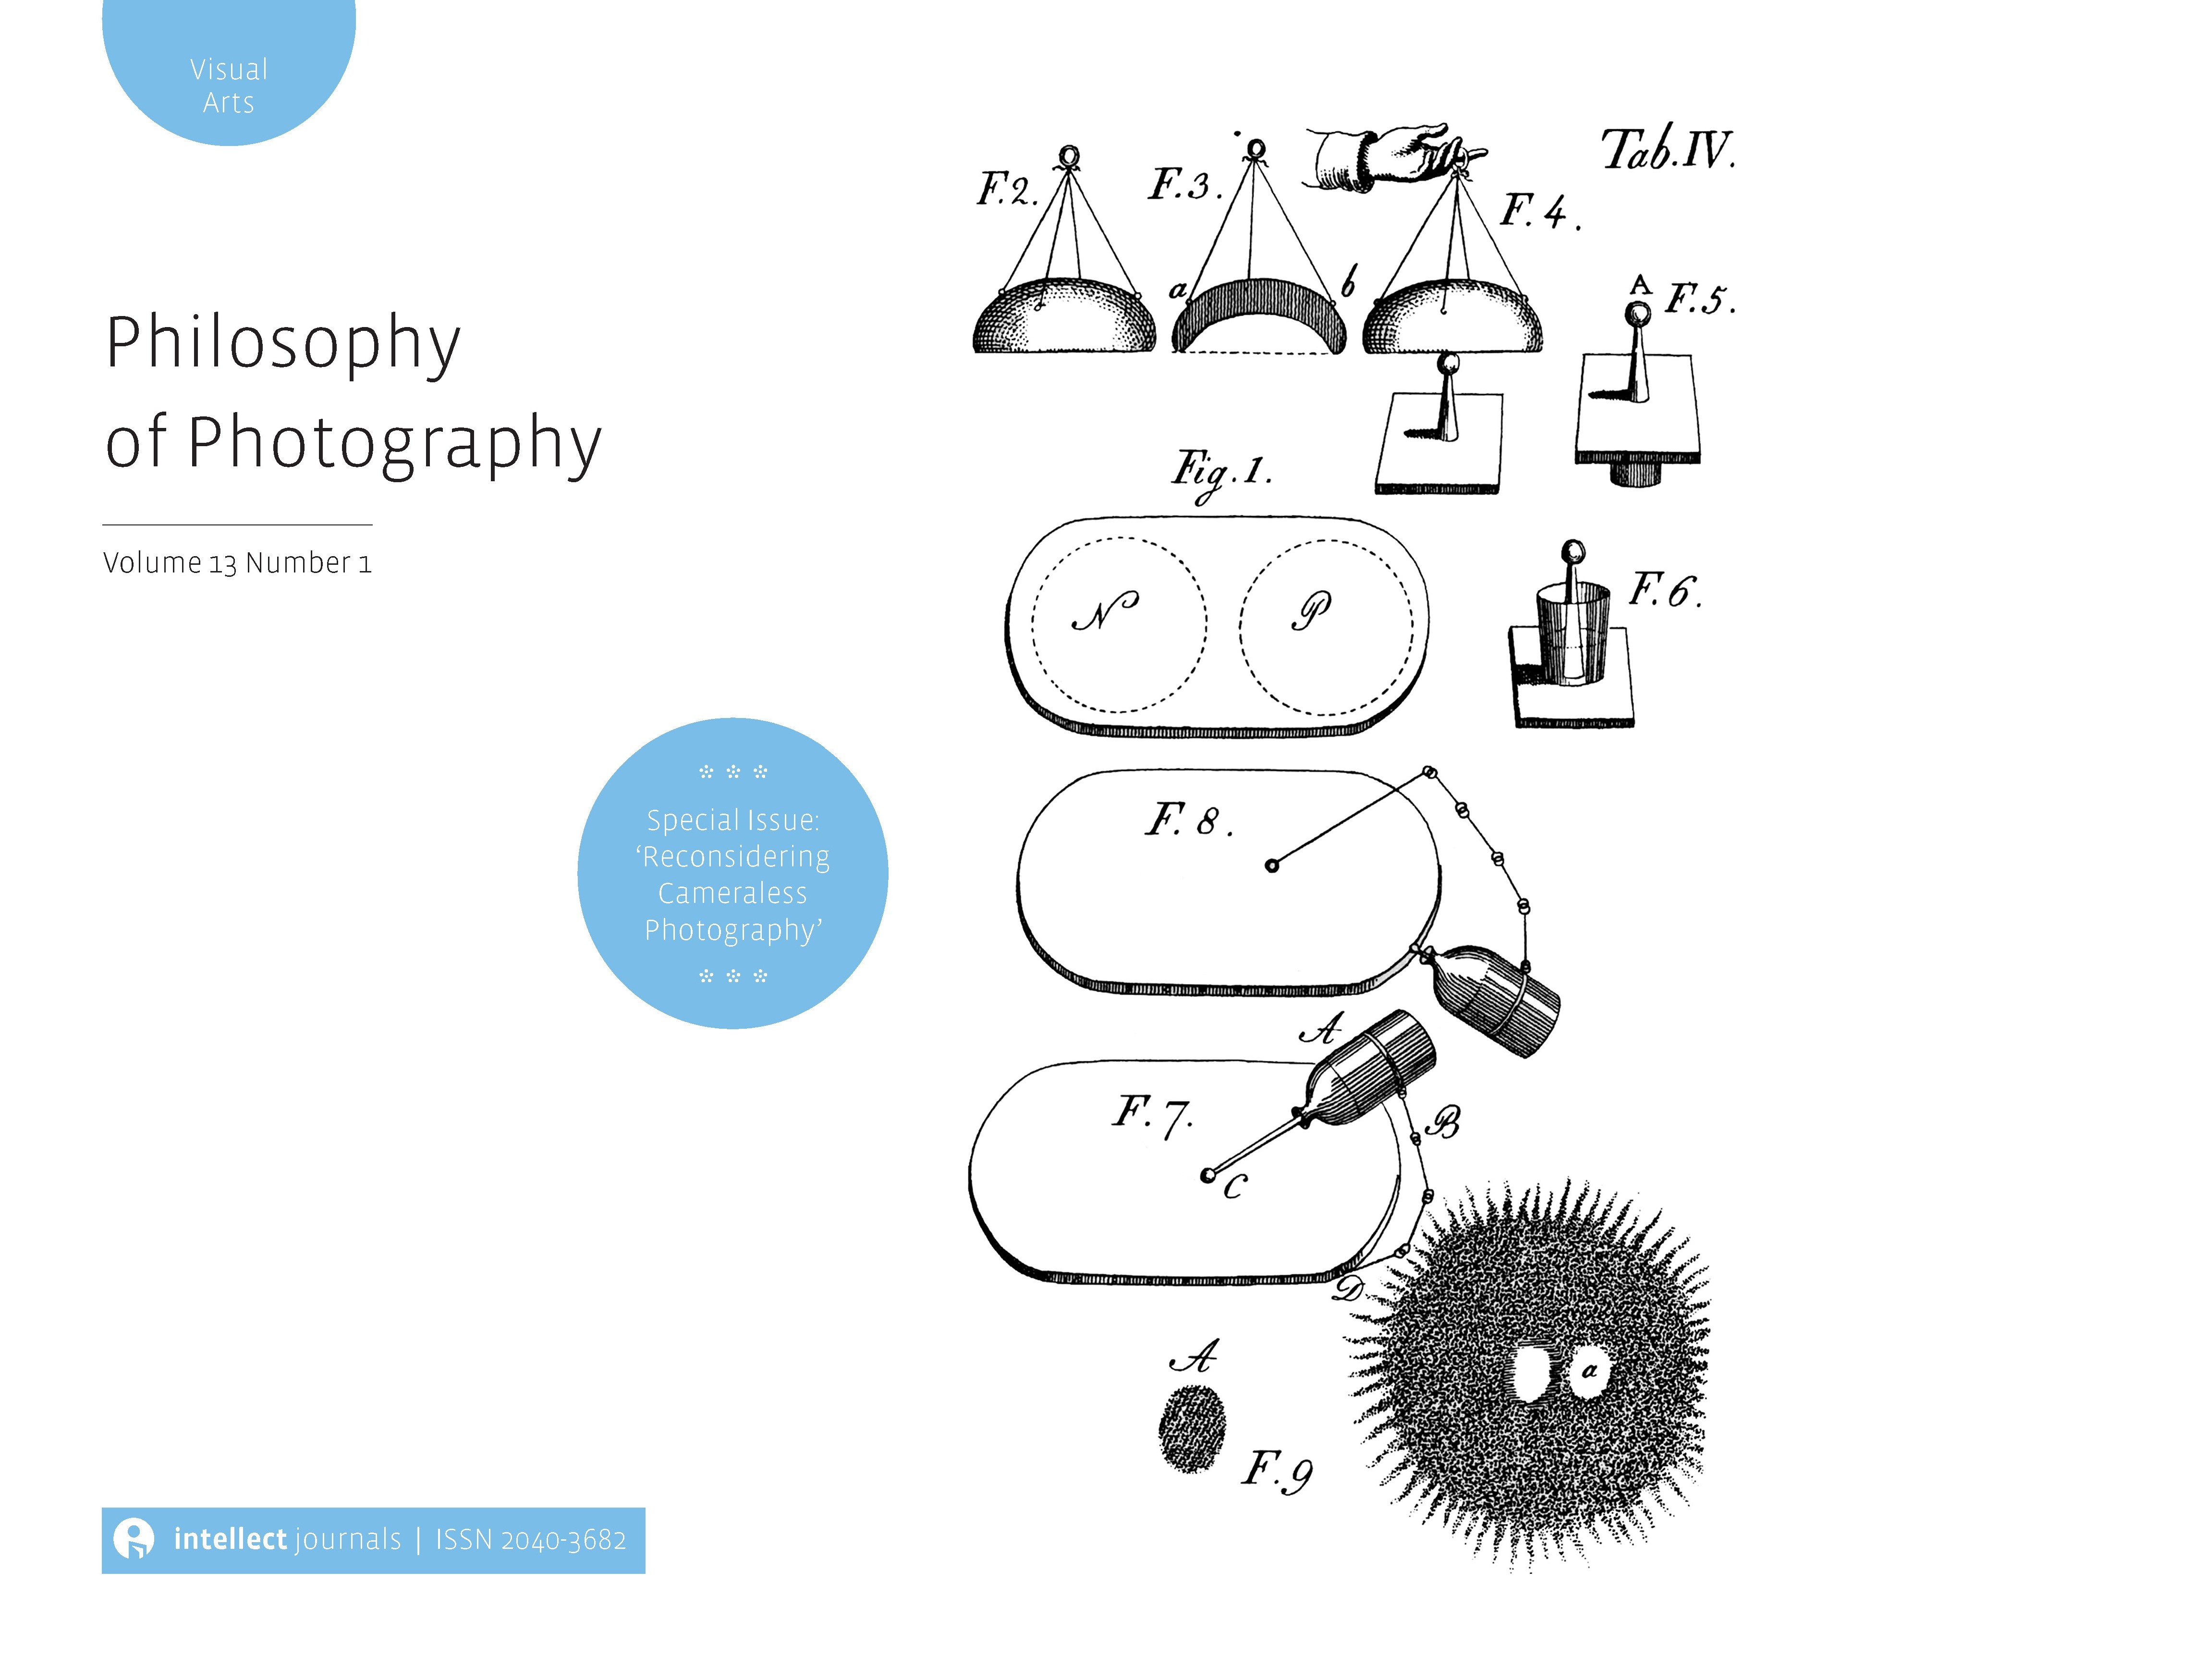 Philosophy of Photography 13.1 is out now! Special Issue